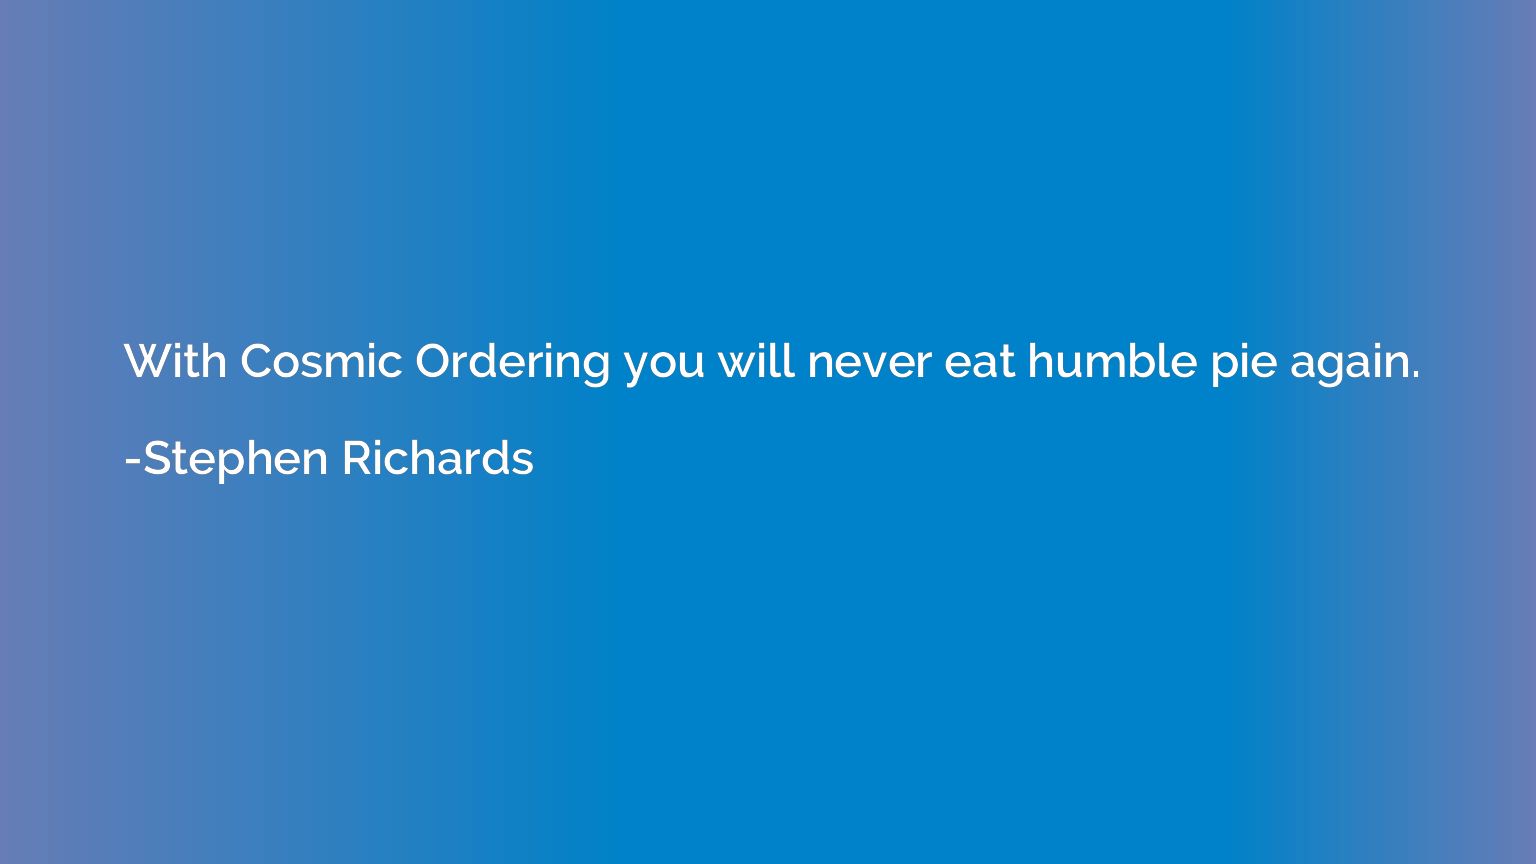 With Cosmic Ordering you will never eat humble pie again.